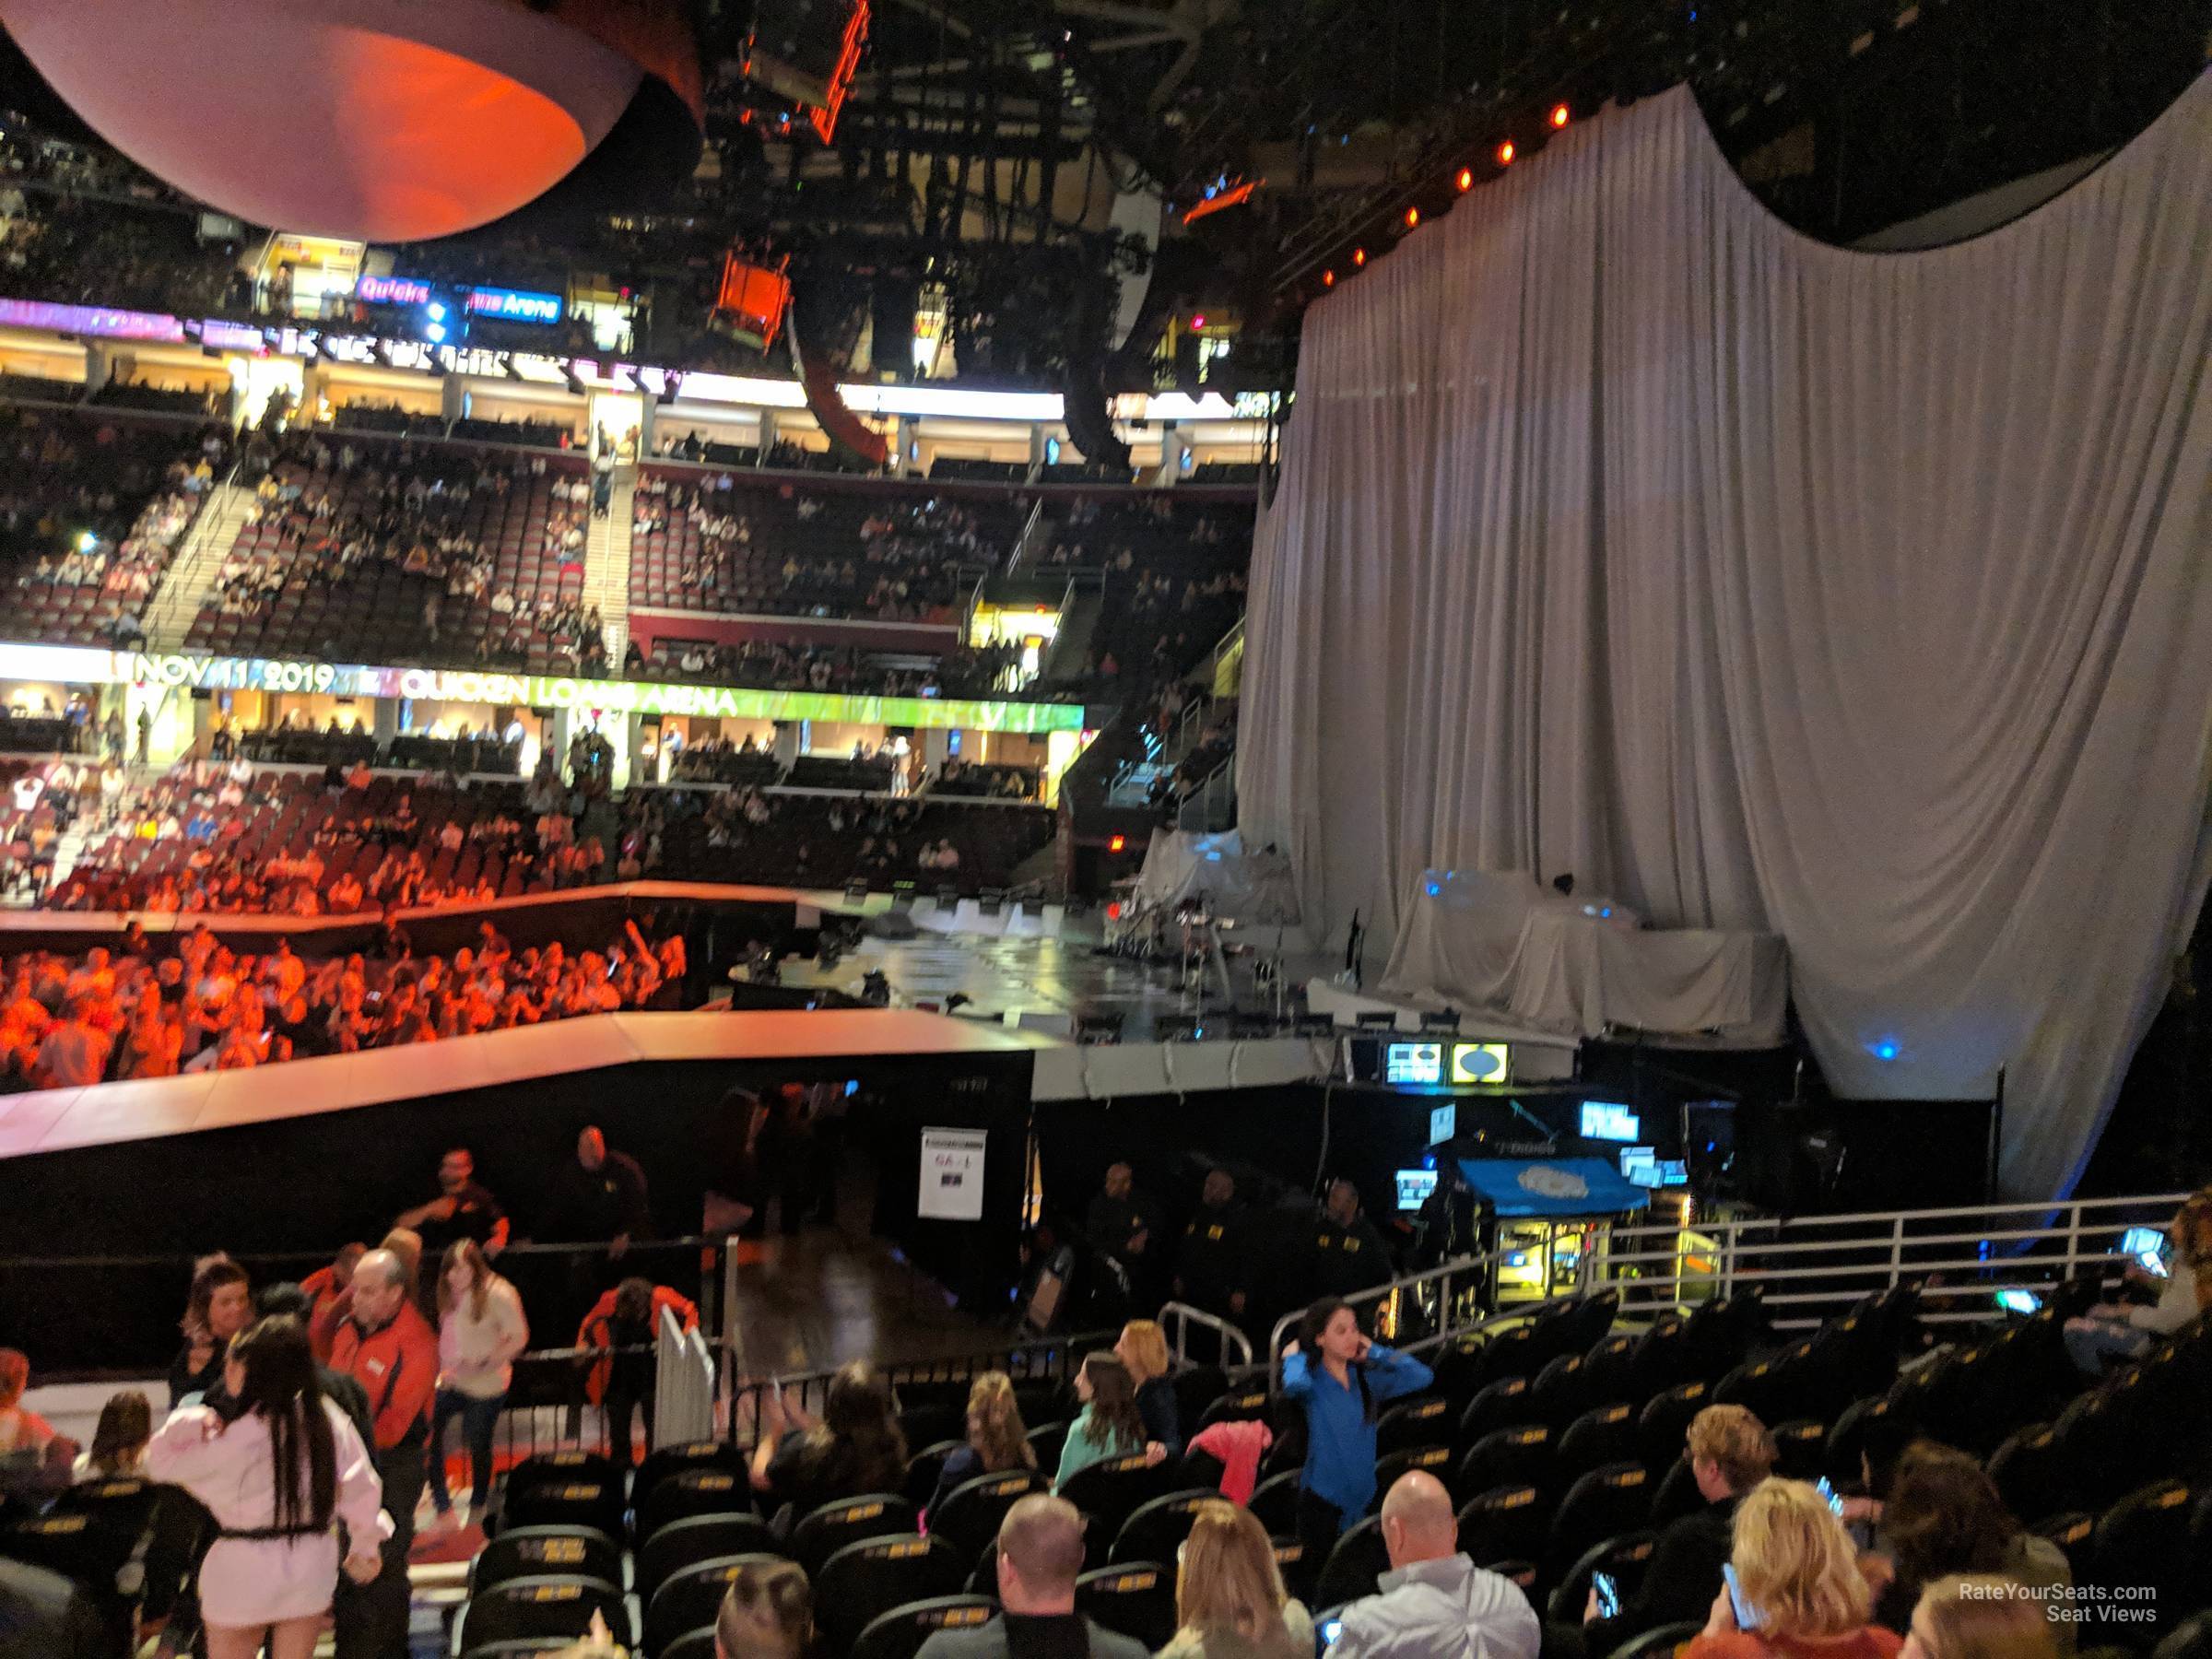 section 119, row 14 seat view  for concert - rocket mortgage fieldhouse